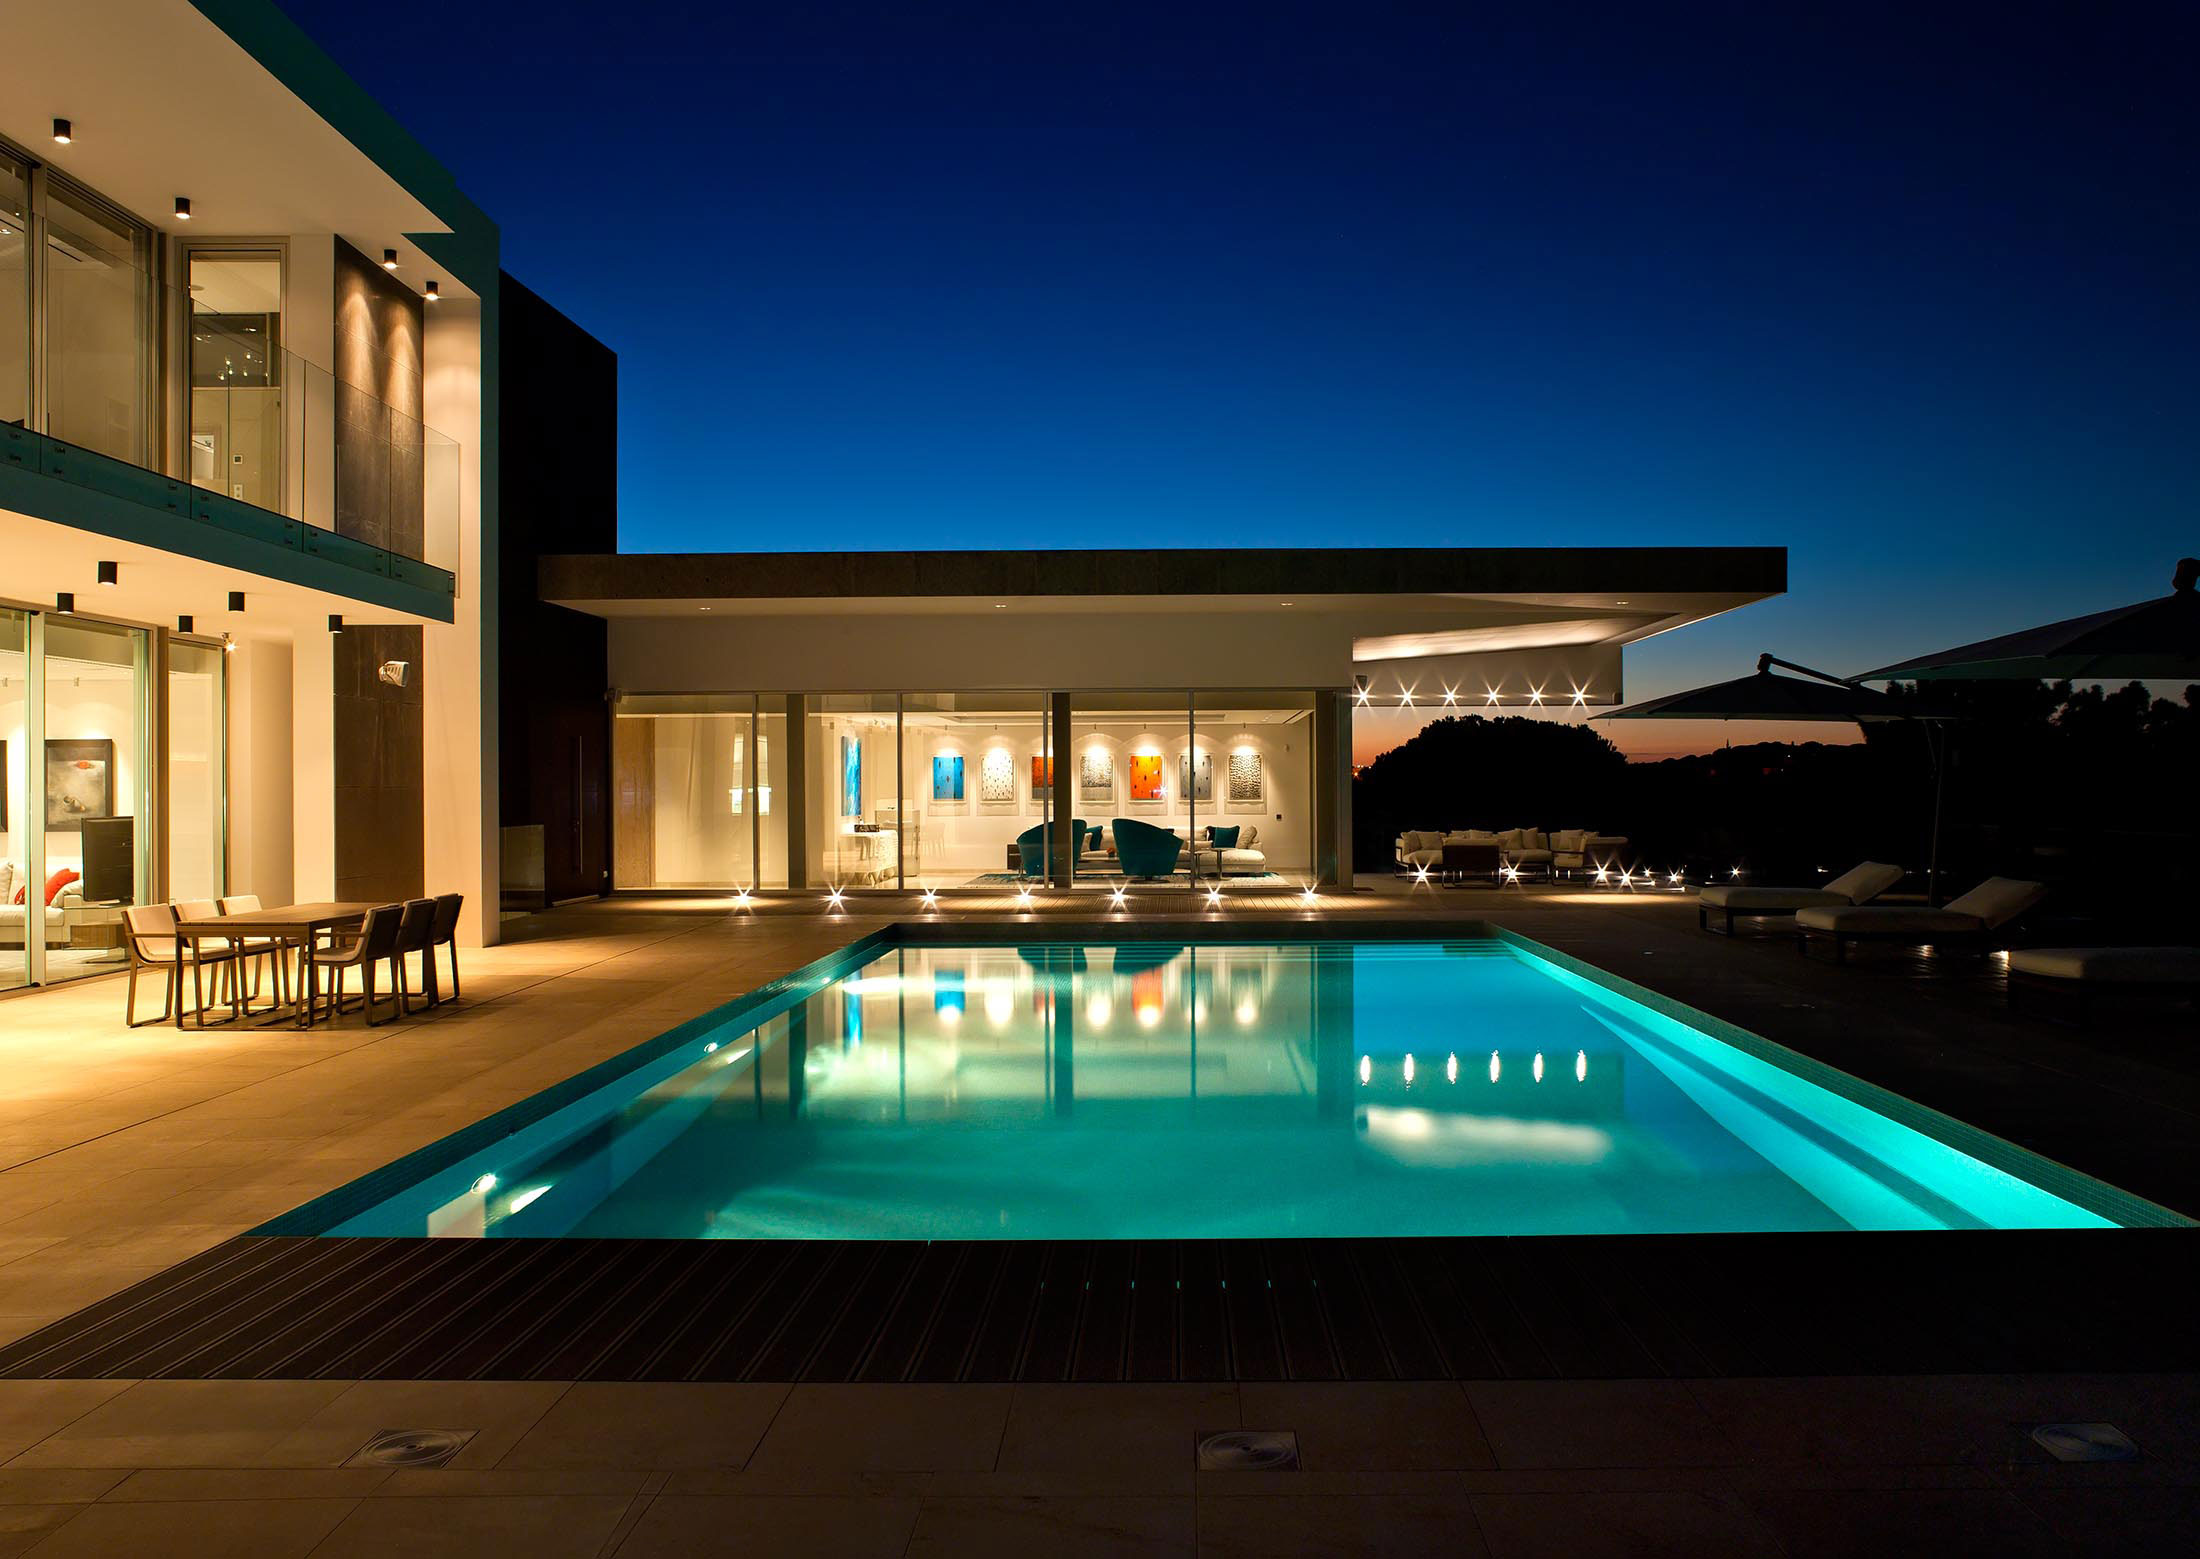 Pool, Lighting, Family Home in Portugal